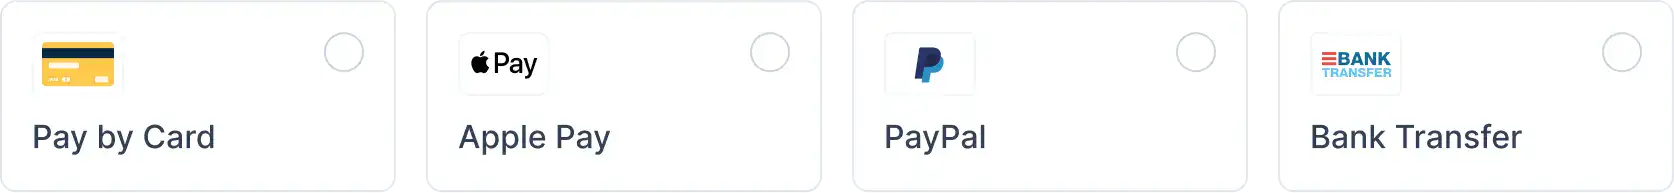 Payment options preview showcasing 'Pay by Card', 'Apple Pay', 'PayPal', and 'Bank Transfer' methods available on eSafetyFirst.